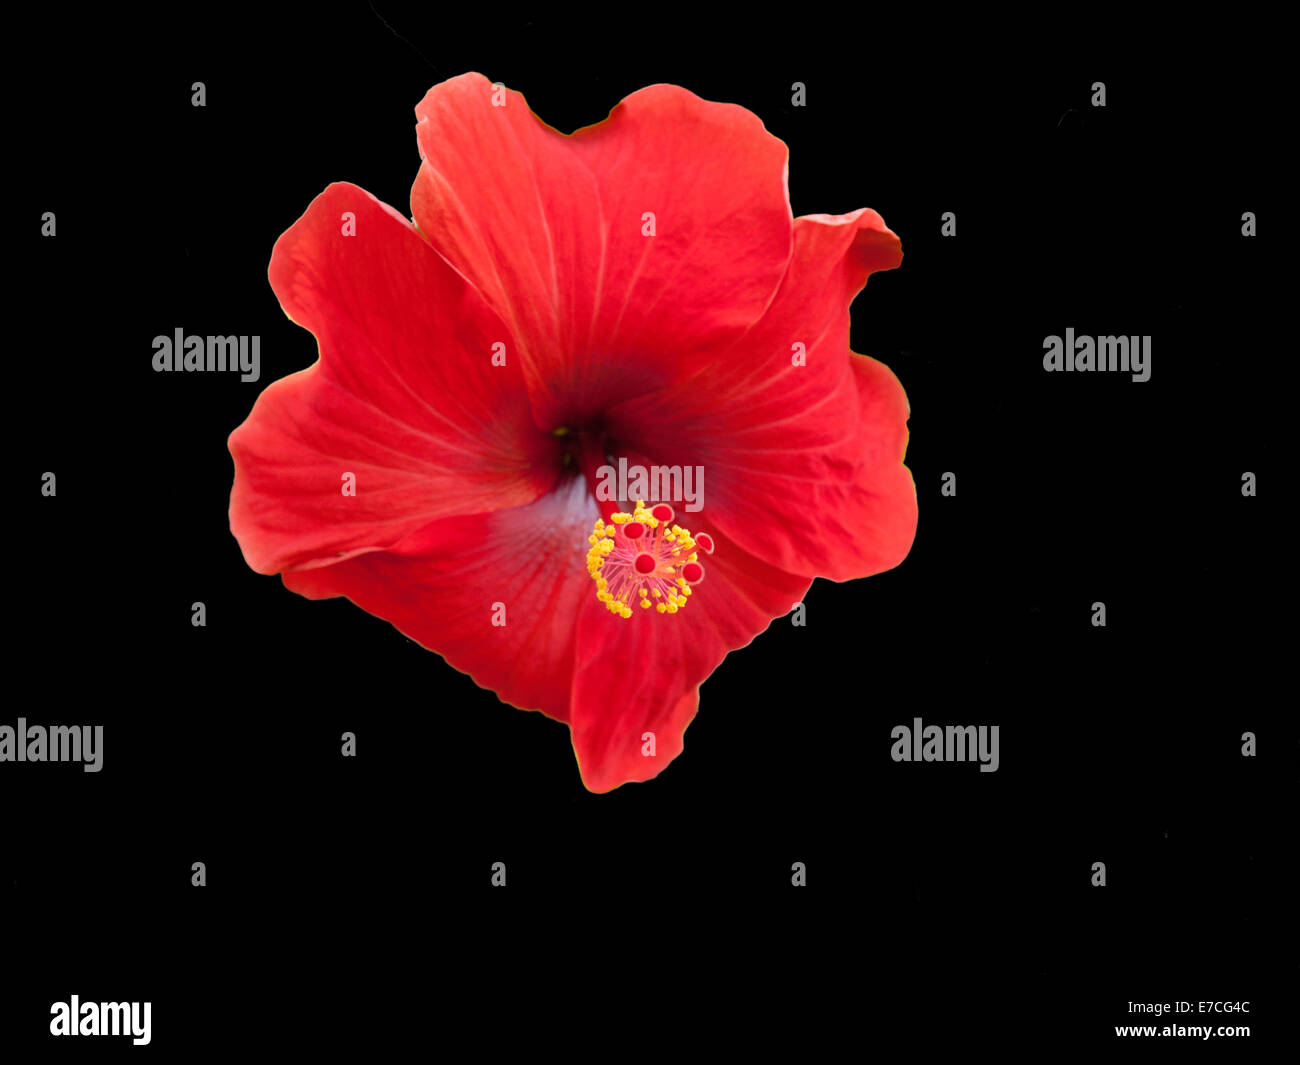 Hibiscus flower isolated on black Banque D'Images